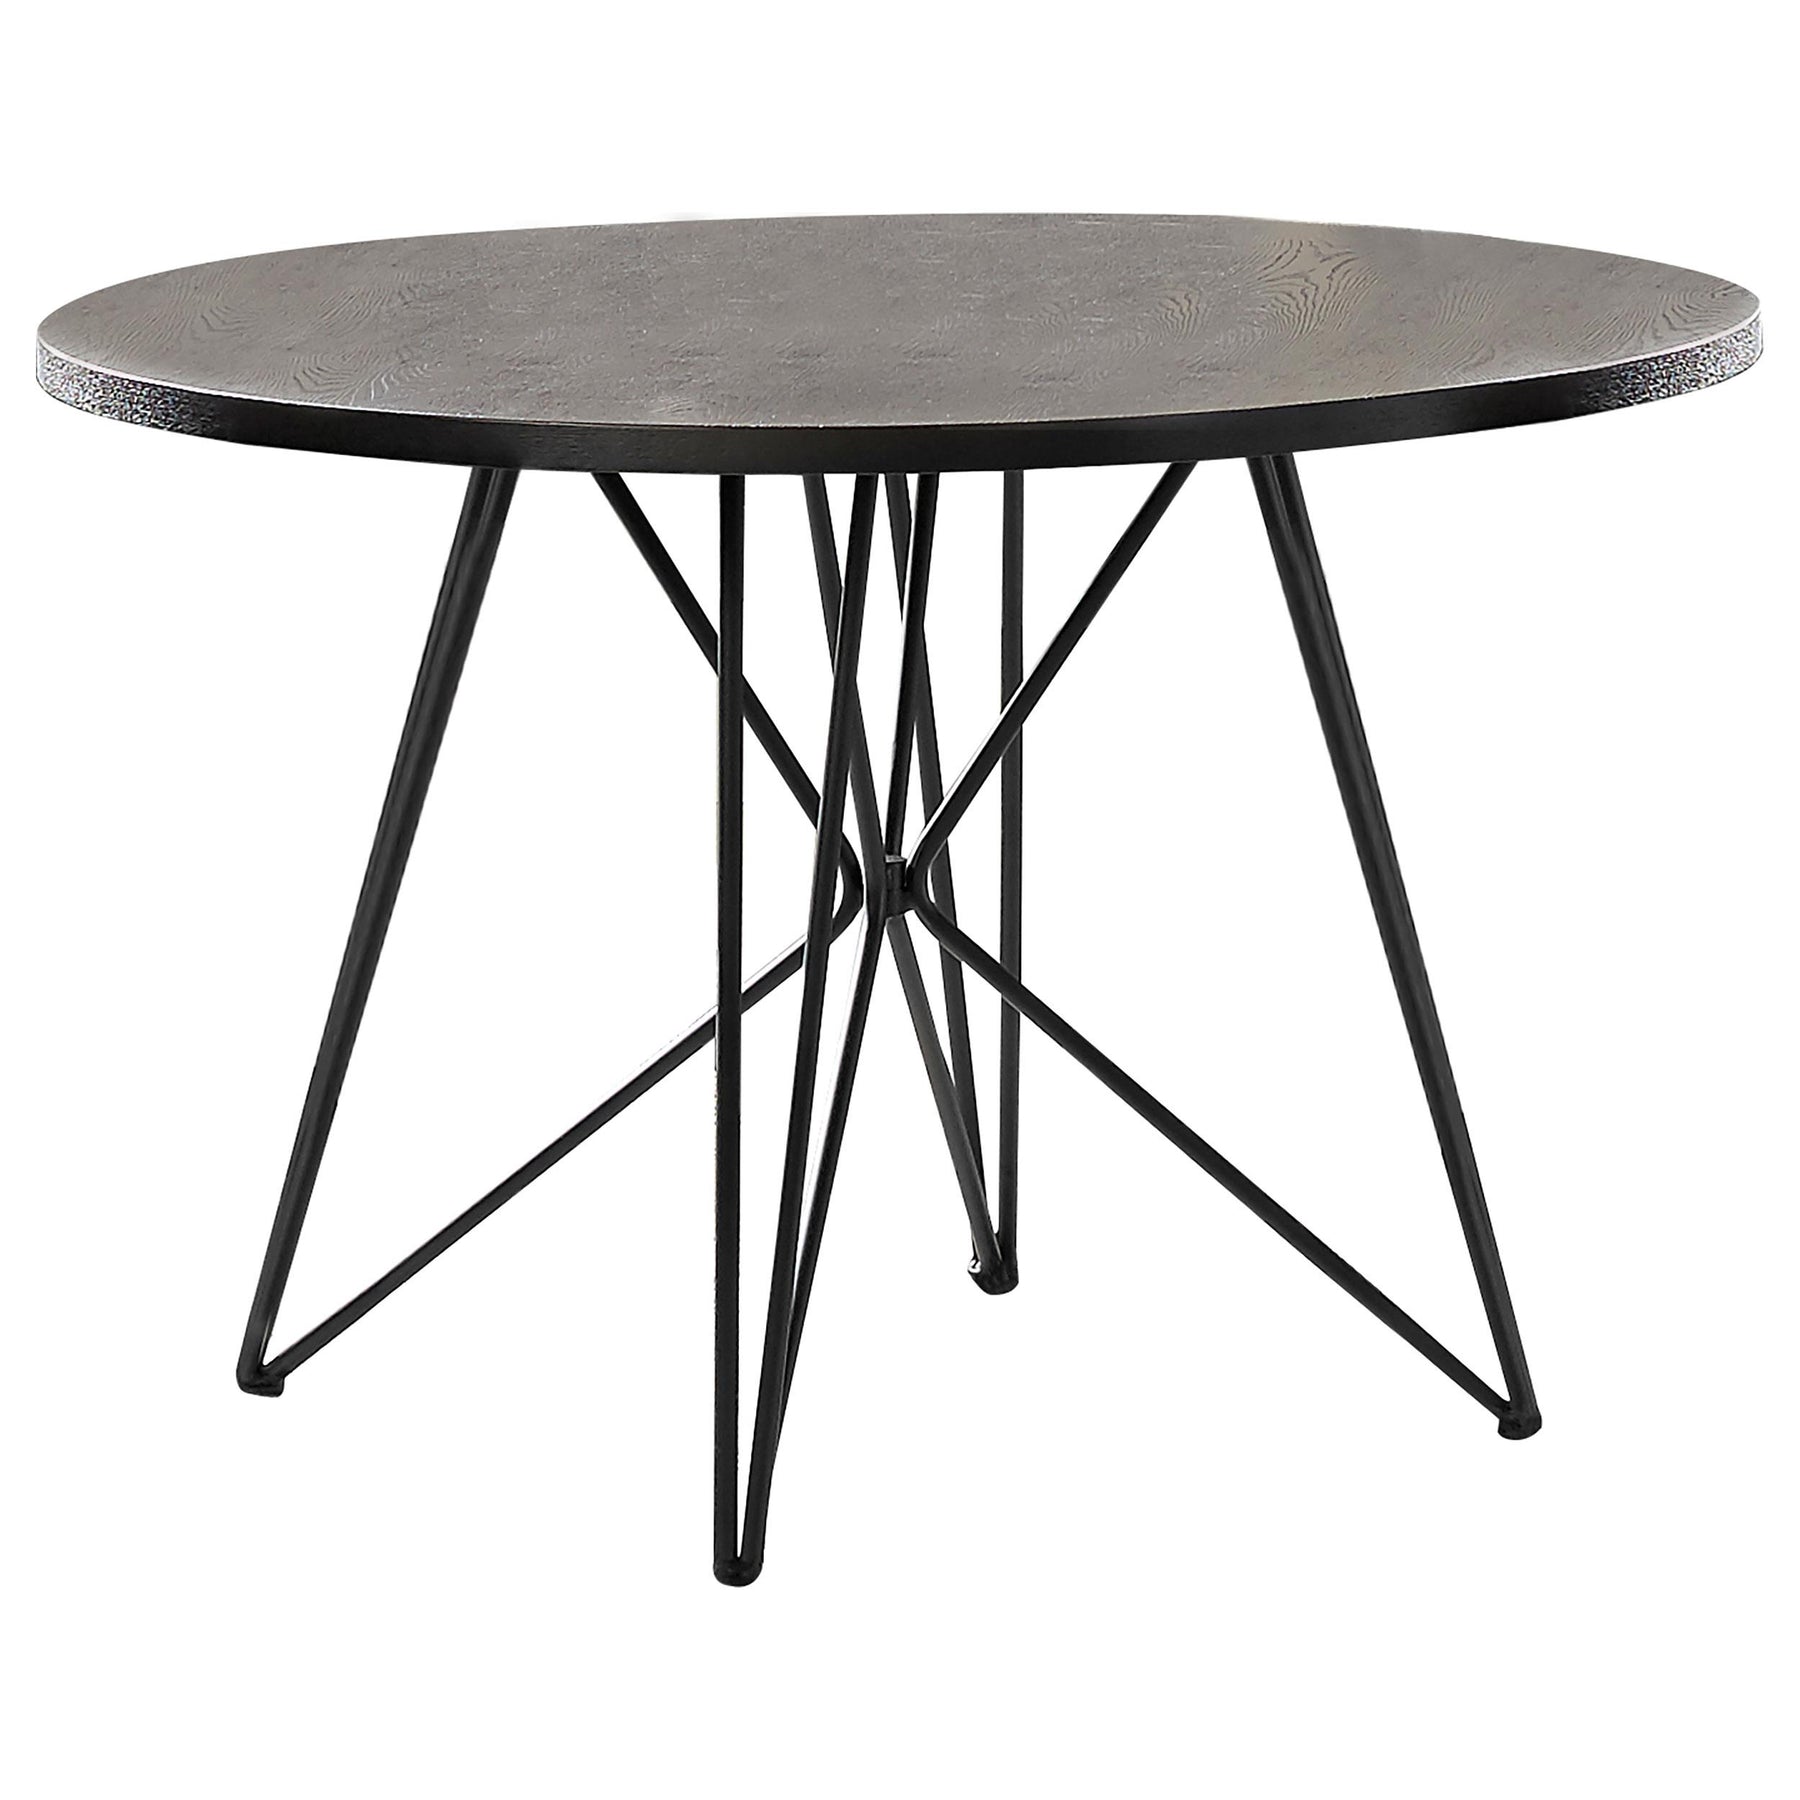 Rennes Round Table Black and Gunmetal Rennes Round Table Black and Gunmetal Half Price Furniture